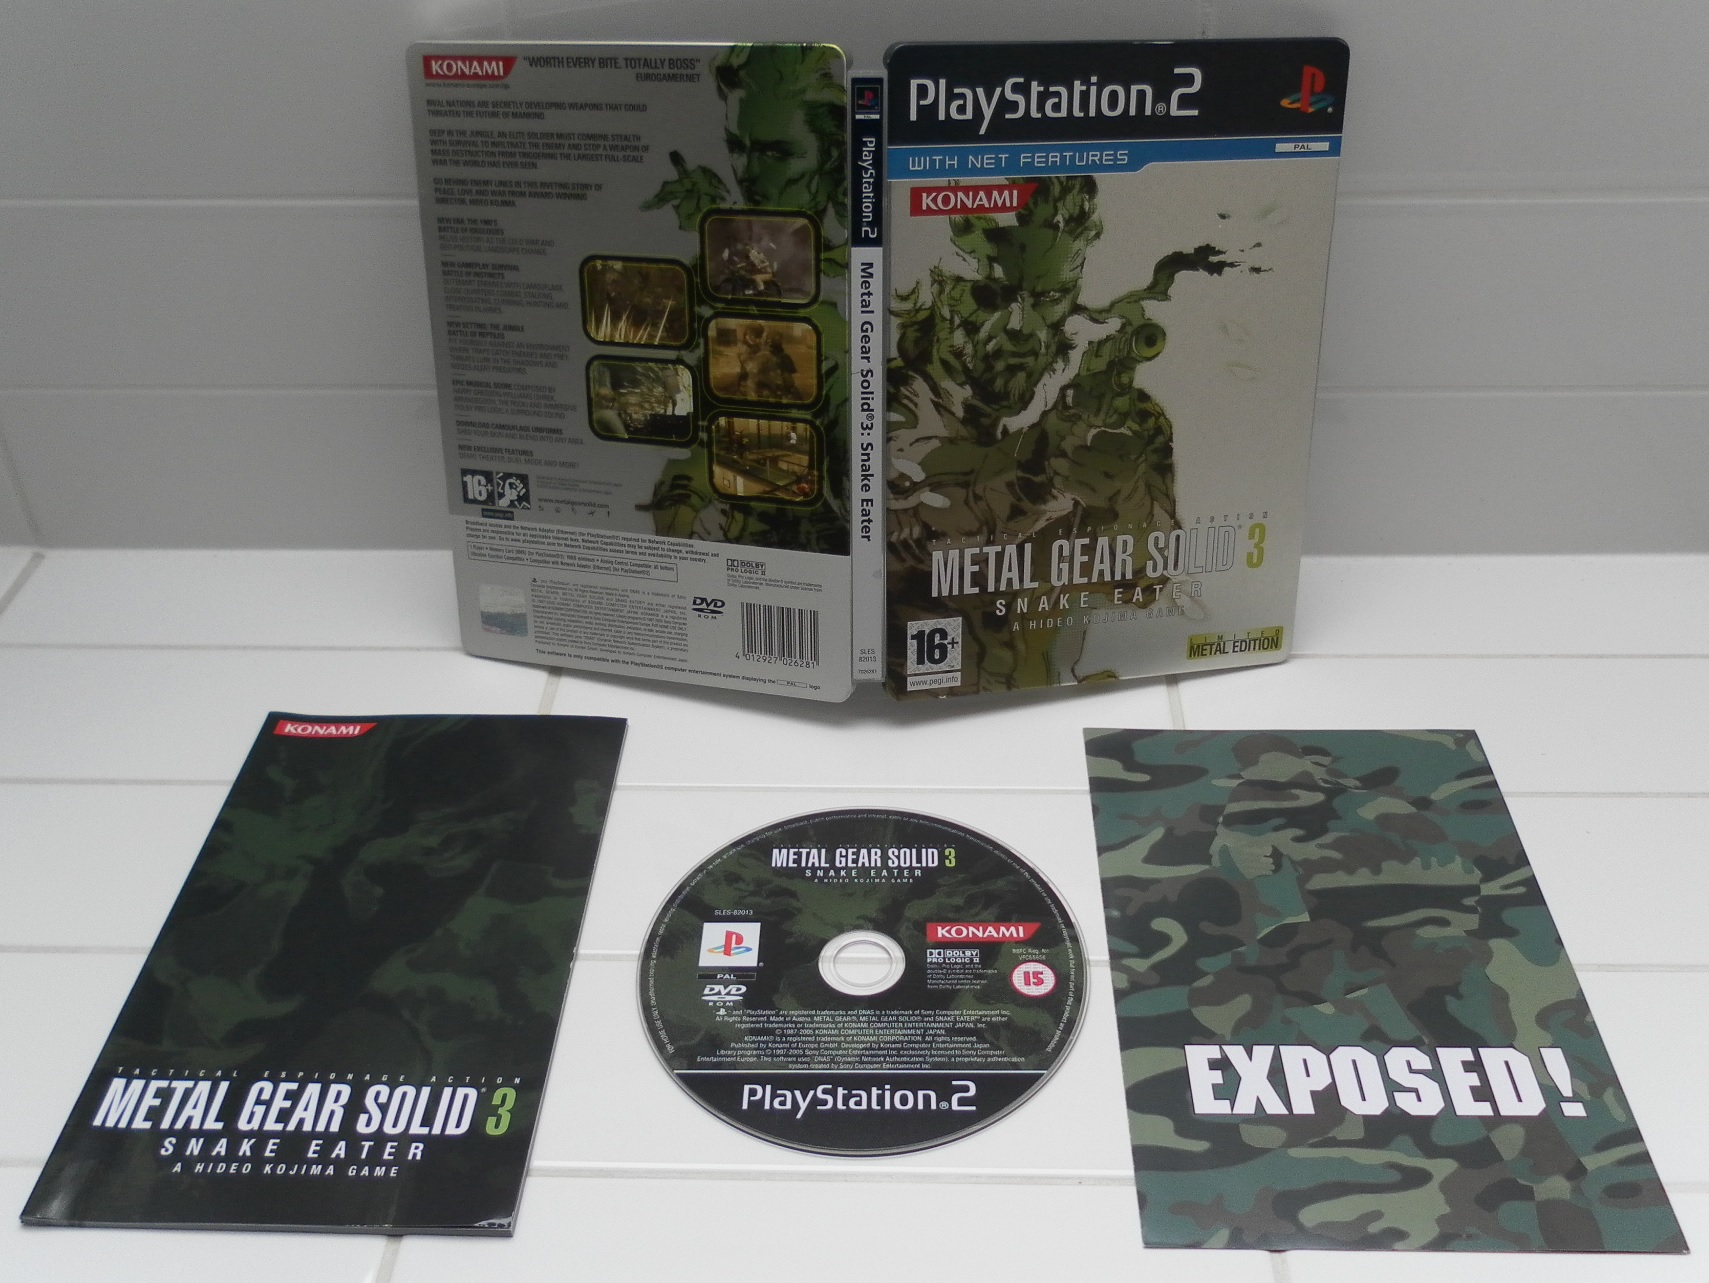 Metal Gear Solid 3: Snake Eater - Limited Metal Edition (2004)